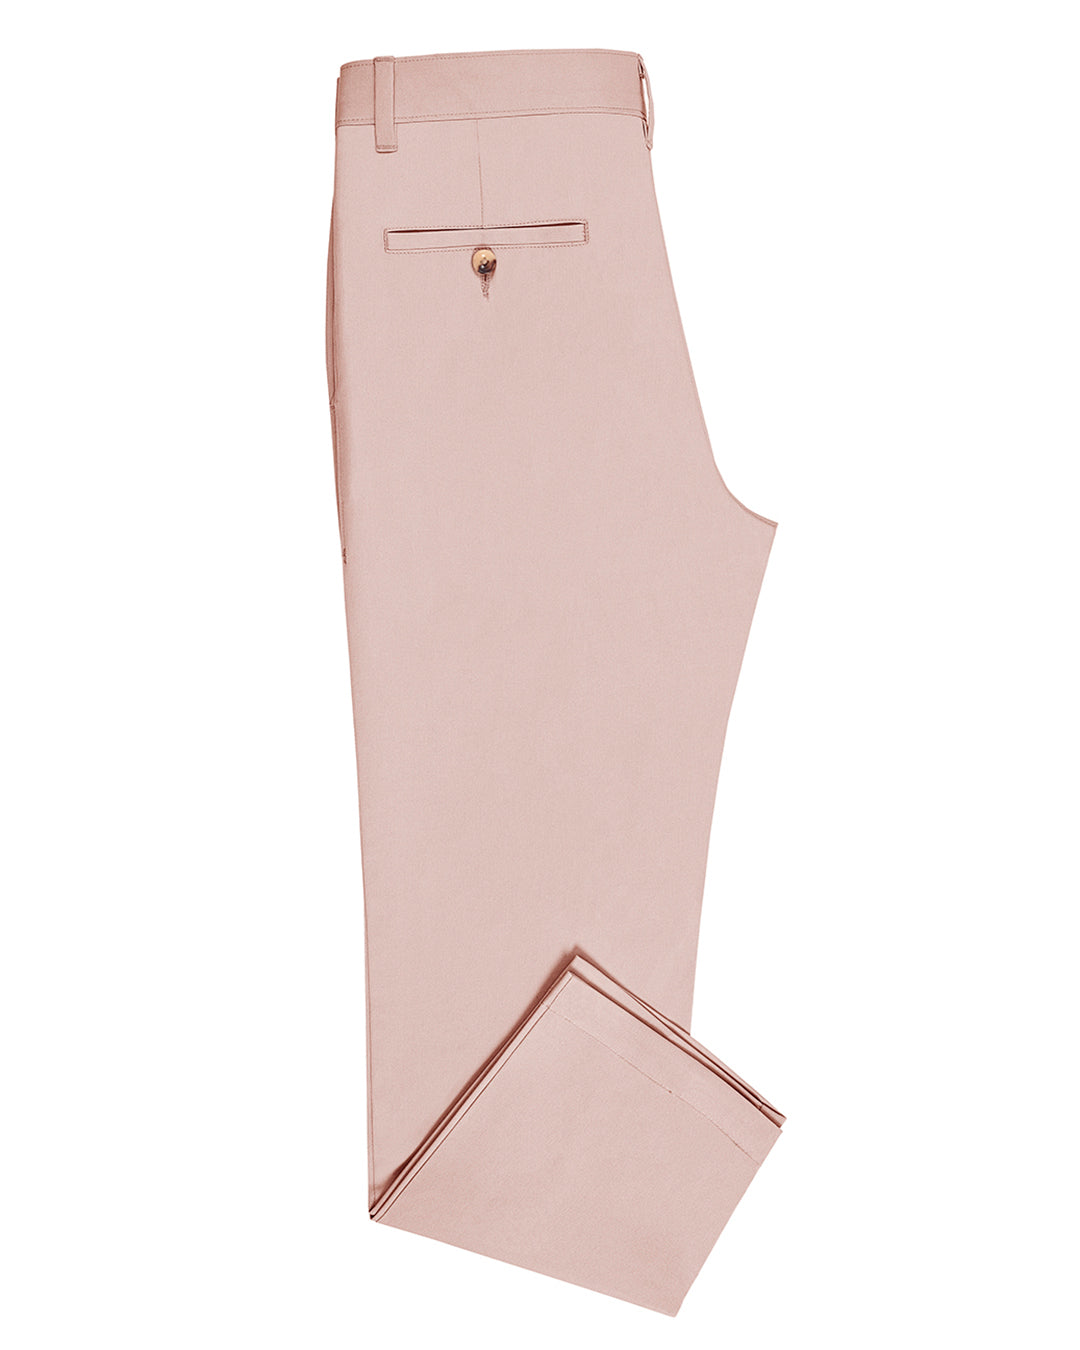 Side view of custom Genoa Chino pants for men by Luxire in pale pink